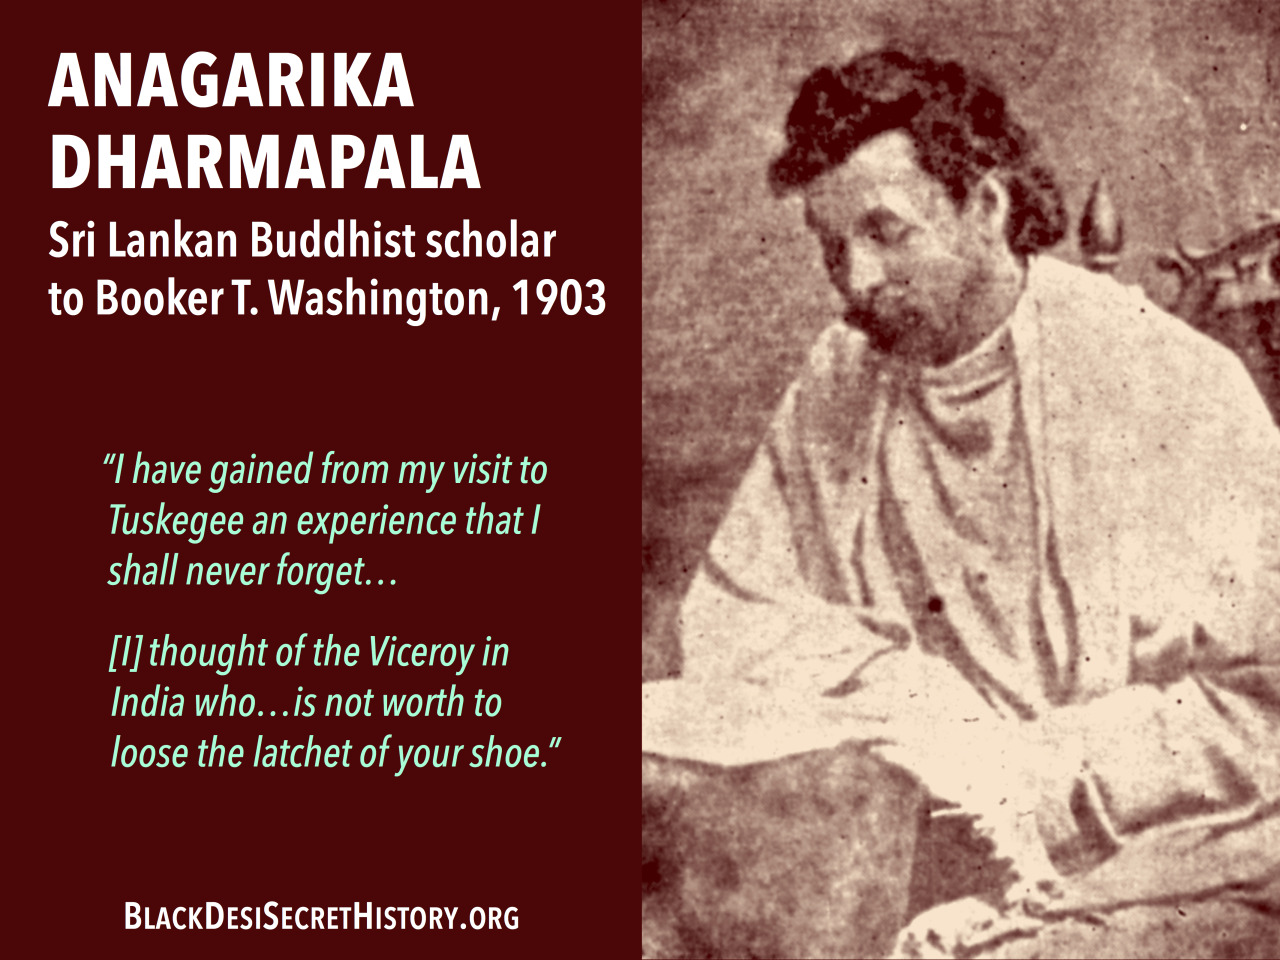 ANAGARIKA DHARMAPALA, Sri Lankan Buddhist scholar writing to Booker T. Washington, 1903: “I have gained from my visit to Tuskegee an experience that I shall never forget…[I] thought of the Viceroy in India who…is not worth to loose the latchet of your shoe.”